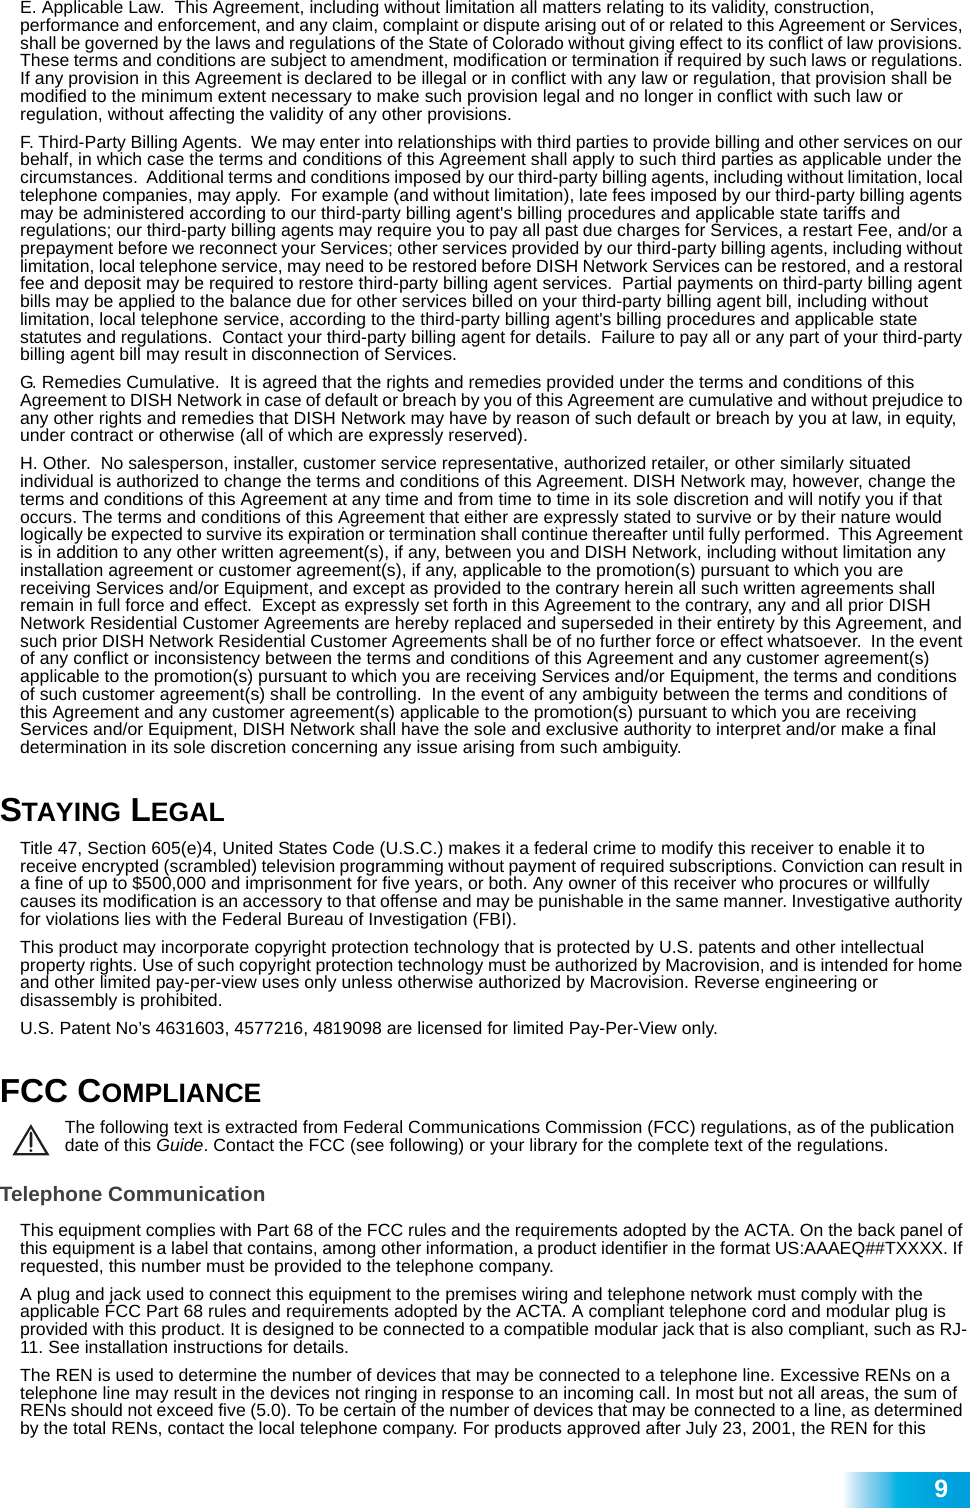  9E. Applicable Law.  This Agreement, including without limitation all matters relating to its validity, construction, performance and enforcement, and any claim, complaint or dispute arising out of or related to this Agreement or Services, shall be governed by the laws and regulations of the State of Colorado without giving effect to its conflict of law provisions. These terms and conditions are subject to amendment, modification or termination if required by such laws or regulations. If any provision in this Agreement is declared to be illegal or in conflict with any law or regulation, that provision shall be modified to the minimum extent necessary to make such provision legal and no longer in conflict with such law or regulation, without affecting the validity of any other provisions. F. Third-Party Billing Agents.  We may enter into relationships with third parties to provide billing and other services on our behalf, in which case the terms and conditions of this Agreement shall apply to such third parties as applicable under the circumstances.  Additional terms and conditions imposed by our third-party billing agents, including without limitation, local telephone companies, may apply.  For example (and without limitation), late fees imposed by our third-party billing agents may be administered according to our third-party billing agent&apos;s billing procedures and applicable state tariffs and regulations; our third-party billing agents may require you to pay all past due charges for Services, a restart Fee, and/or a prepayment before we reconnect your Services; other services provided by our third-party billing agents, including without limitation, local telephone service, may need to be restored before DISH Network Services can be restored, and a restoral fee and deposit may be required to restore third-party billing agent services.  Partial payments on third-party billing agent bills may be applied to the balance due for other services billed on your third-party billing agent bill, including without limitation, local telephone service, according to the third-party billing agent&apos;s billing procedures and applicable state statutes and regulations.  Contact your third-party billing agent for details.  Failure to pay all or any part of your third-party billing agent bill may result in disconnection of Services.  G. Remedies Cumulative.  It is agreed that the rights and remedies provided under the terms and conditions of this Agreement to DISH Network in case of default or breach by you of this Agreement are cumulative and without prejudice to any other rights and remedies that DISH Network may have by reason of such default or breach by you at law, in equity, under contract or otherwise (all of which are expressly reserved).H. Other.  No salesperson, installer, customer service representative, authorized retailer, or other similarly situated individual is authorized to change the terms and conditions of this Agreement. DISH Network may, however, change the terms and conditions of this Agreement at any time and from time to time in its sole discretion and will notify you if that occurs. The terms and conditions of this Agreement that either are expressly stated to survive or by their nature would logically be expected to survive its expiration or termination shall continue thereafter until fully performed.  This Agreement is in addition to any other written agreement(s), if any, between you and DISH Network, including without limitation any installation agreement or customer agreement(s), if any, applicable to the promotion(s) pursuant to which you are receiving Services and/or Equipment, and except as provided to the contrary herein all such written agreements shall remain in full force and effect.  Except as expressly set forth in this Agreement to the contrary, any and all prior DISH Network Residential Customer Agreements are hereby replaced and superseded in their entirety by this Agreement, and such prior DISH Network Residential Customer Agreements shall be of no further force or effect whatsoever.  In the event of any conflict or inconsistency between the terms and conditions of this Agreement and any customer agreement(s) applicable to the promotion(s) pursuant to which you are receiving Services and/or Equipment, the terms and conditions of such customer agreement(s) shall be controlling.  In the event of any ambiguity between the terms and conditions of this Agreement and any customer agreement(s) applicable to the promotion(s) pursuant to which you are receiving Services and/or Equipment, DISH Network shall have the sole and exclusive authority to interpret and/or make a final determination in its sole discretion concerning any issue arising from such ambiguity.STAYING LEGAL Title 47, Section 605(e)4, United States Code (U.S.C.) makes it a federal crime to modify this receiver to enable it to receive encrypted (scrambled) television programming without payment of required subscriptions. Conviction can result in a fine of up to $500,000 and imprisonment for five years, or both. Any owner of this receiver who procures or willfully causes its modification is an accessory to that offense and may be punishable in the same manner. Investigative authority for violations lies with the Federal Bureau of Investigation (FBI).This product may incorporate copyright protection technology that is protected by U.S. patents and other intellectual property rights. Use of such copyright protection technology must be authorized by Macrovision, and is intended for home and other limited pay-per-view uses only unless otherwise authorized by Macrovision. Reverse engineering or disassembly is prohibited.U.S. Patent No’s 4631603, 4577216, 4819098 are licensed for limited Pay-Per-View only.FCC COMPLIANCEThe following text is extracted from Federal Communications Commission (FCC) regulations, as of the publication date of this Guide. Contact the FCC (see following) or your library for the complete text of the regulations.Telephone CommunicationThis equipment complies with Part 68 of the FCC rules and the requirements adopted by the ACTA. On the back panel of this equipment is a label that contains, among other information, a product identifier in the format US:AAAEQ##TXXXX. If requested, this number must be provided to the telephone company.A plug and jack used to connect this equipment to the premises wiring and telephone network must comply with the applicable FCC Part 68 rules and requirements adopted by the ACTA. A compliant telephone cord and modular plug is provided with this product. It is designed to be connected to a compatible modular jack that is also compliant, such as RJ-11. See installation instructions for details.The REN is used to determine the number of devices that may be connected to a telephone line. Excessive RENs on a telephone line may result in the devices not ringing in response to an incoming call. In most but not all areas, the sum of RENs should not exceed five (5.0). To be certain of the number of devices that may be connected to a line, as determined by the total RENs, contact the local telephone company. For products approved after July 23, 2001, the REN for this 